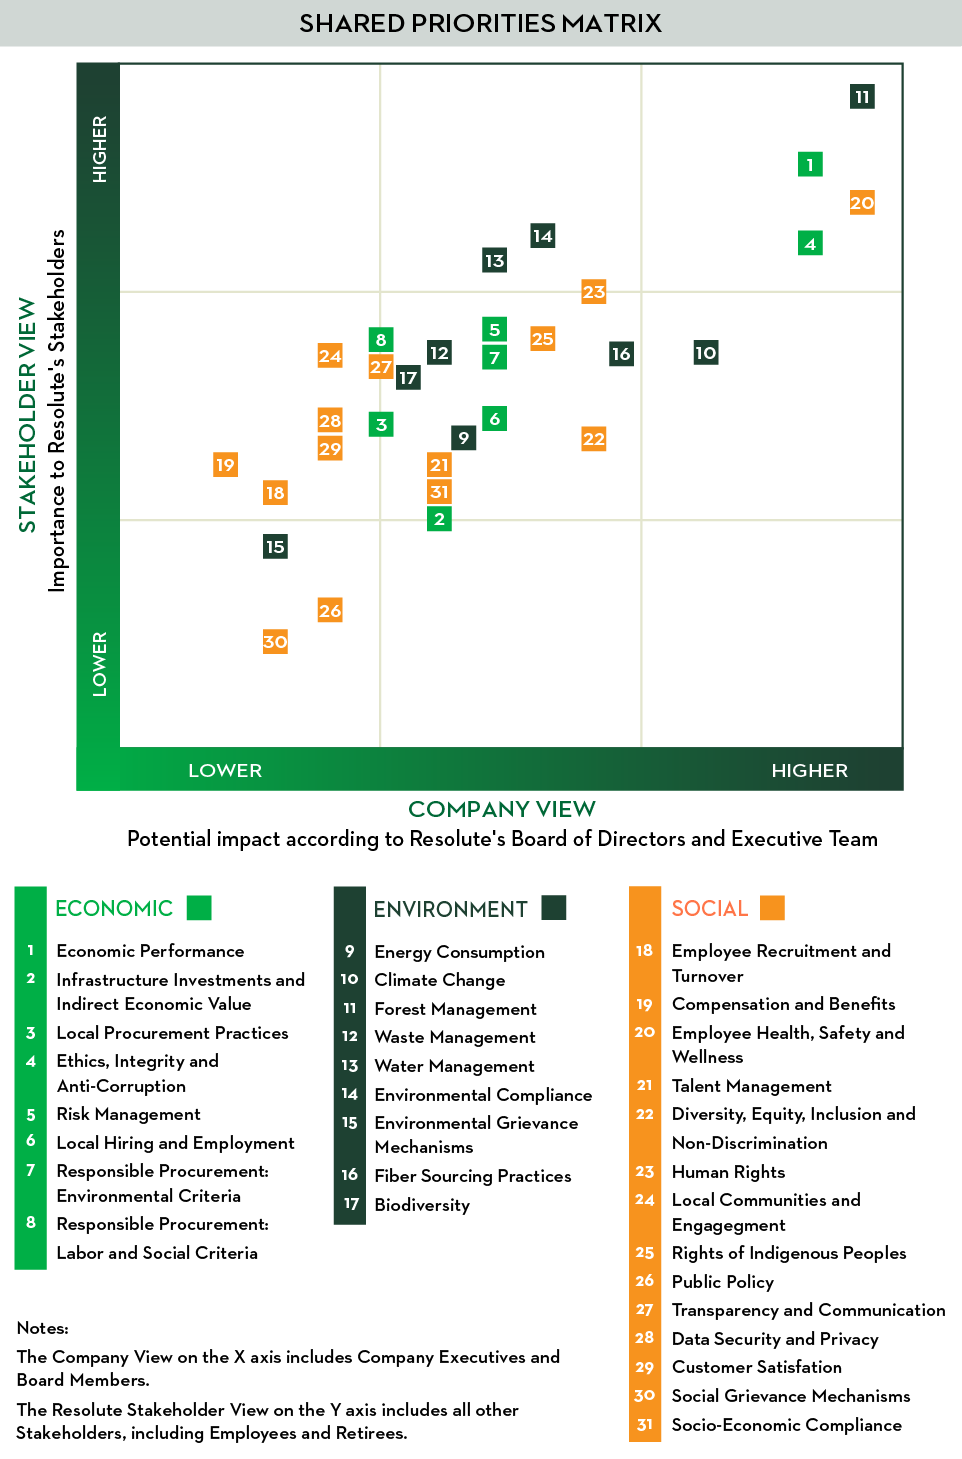 shared priorities matrix depicting stakeholder view and company view of economic, environmental and social key performance indicators